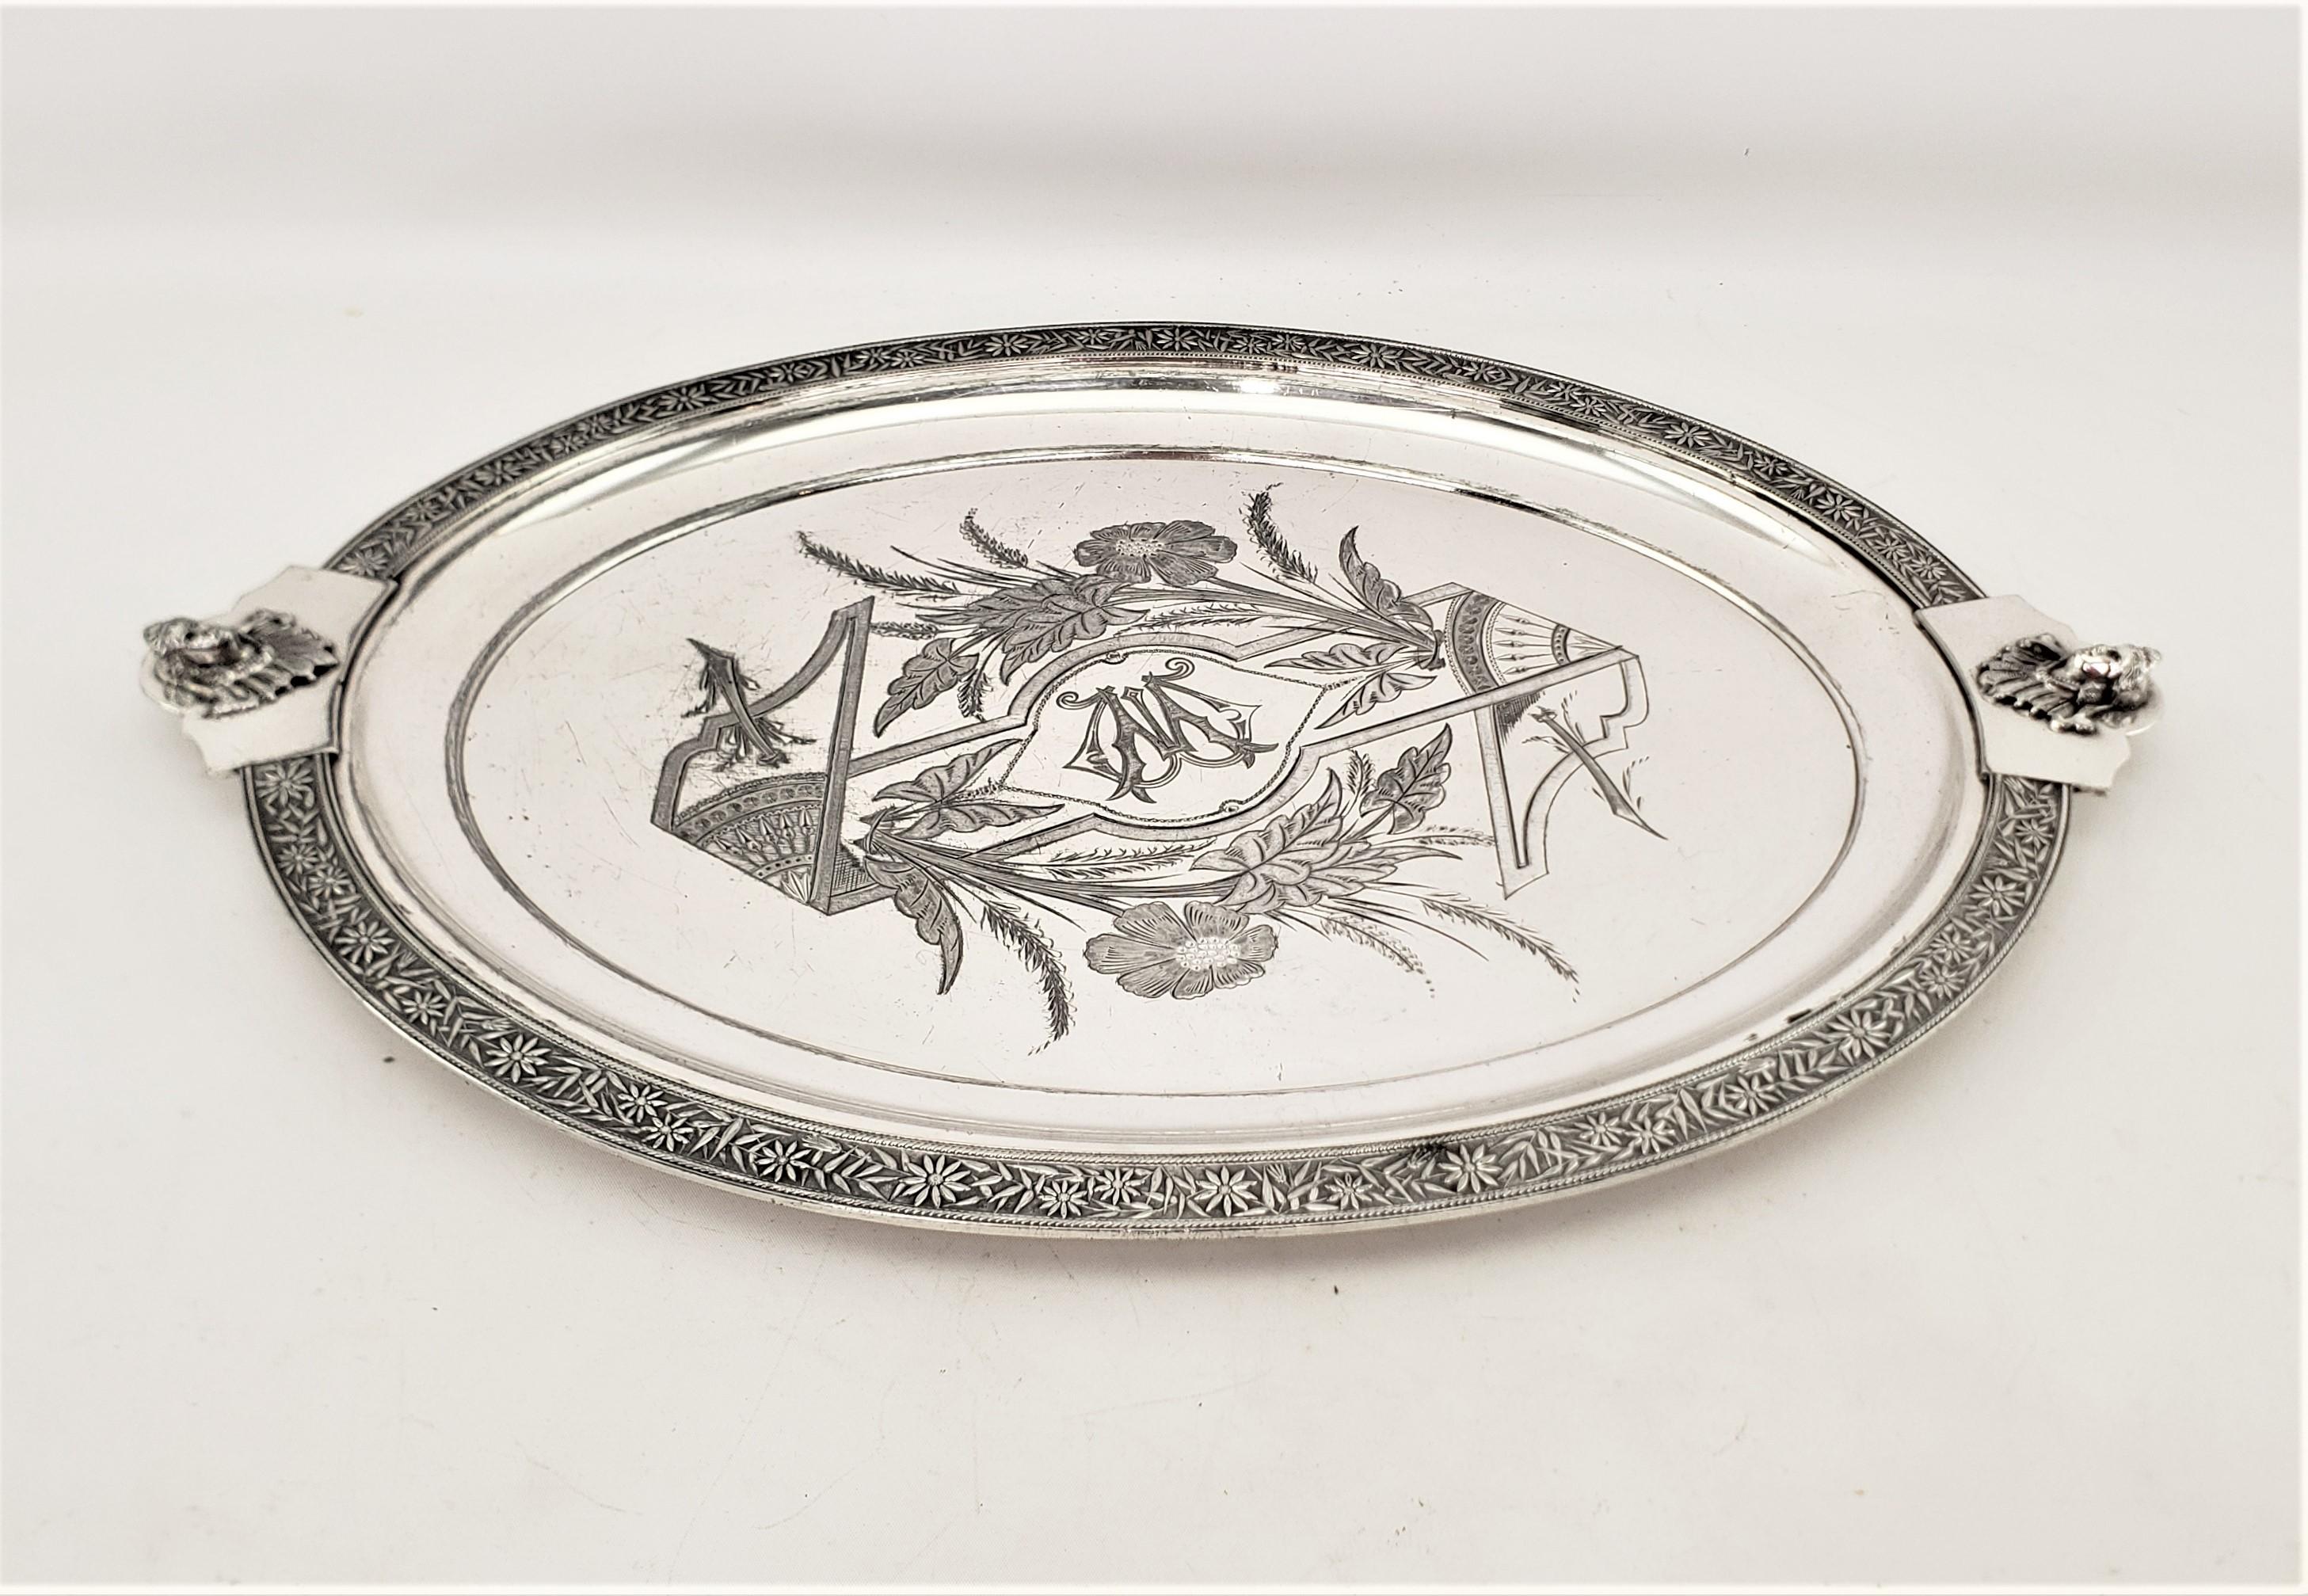 Antique English Silver Plated Serving Tray with Neoclassical Styled Decoration For Sale 1